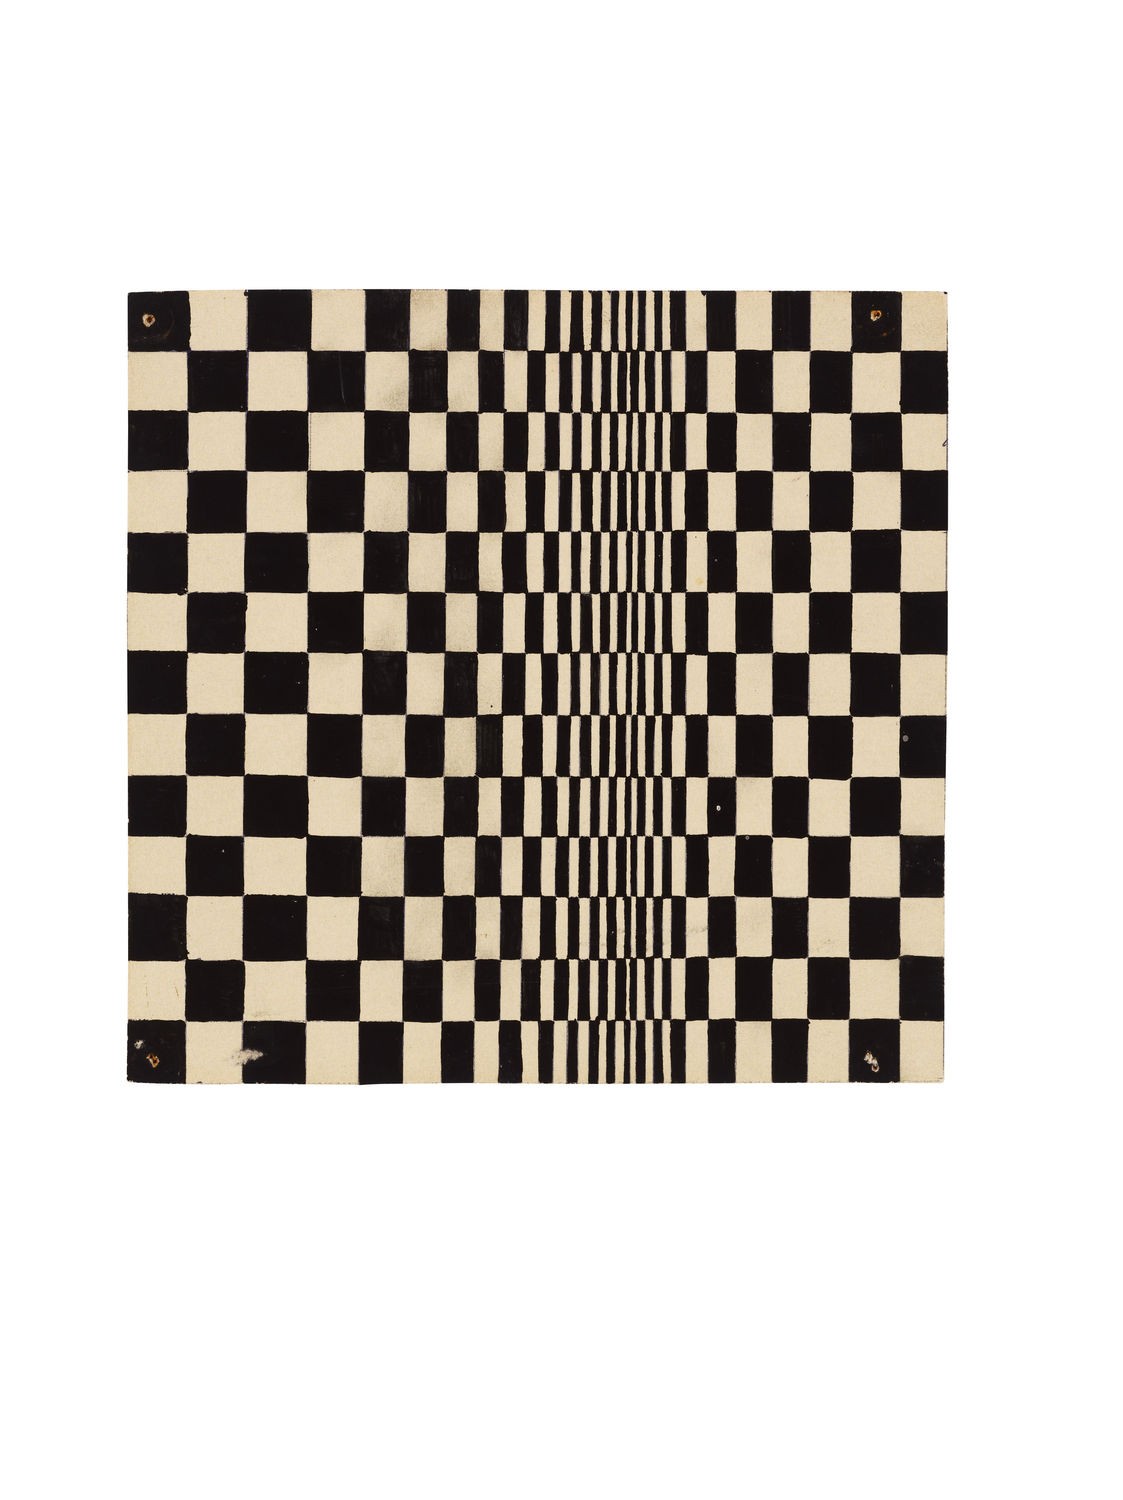 Bridget Riley, study for Movement in Squares, 1961